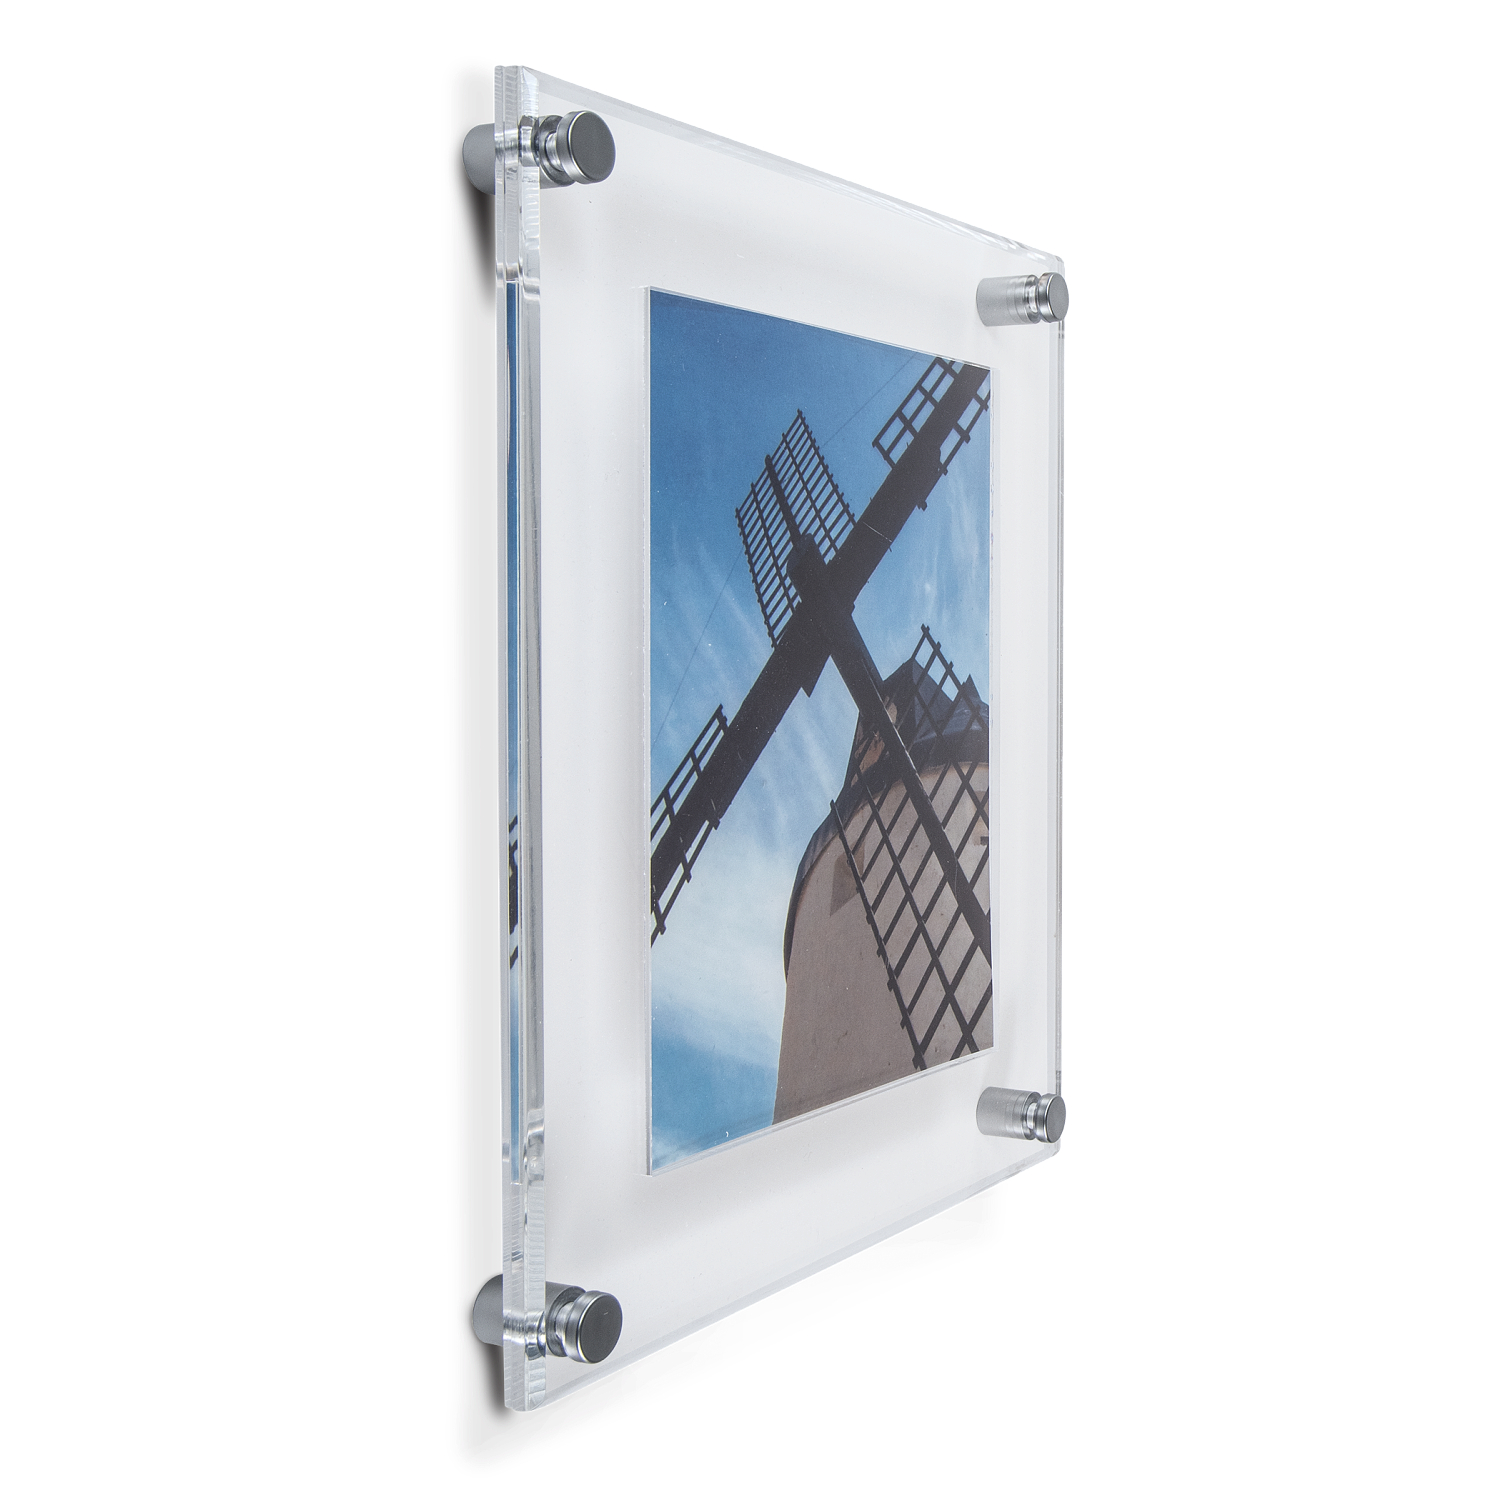 Functional sandwich glass picture frame With Attractive Features 